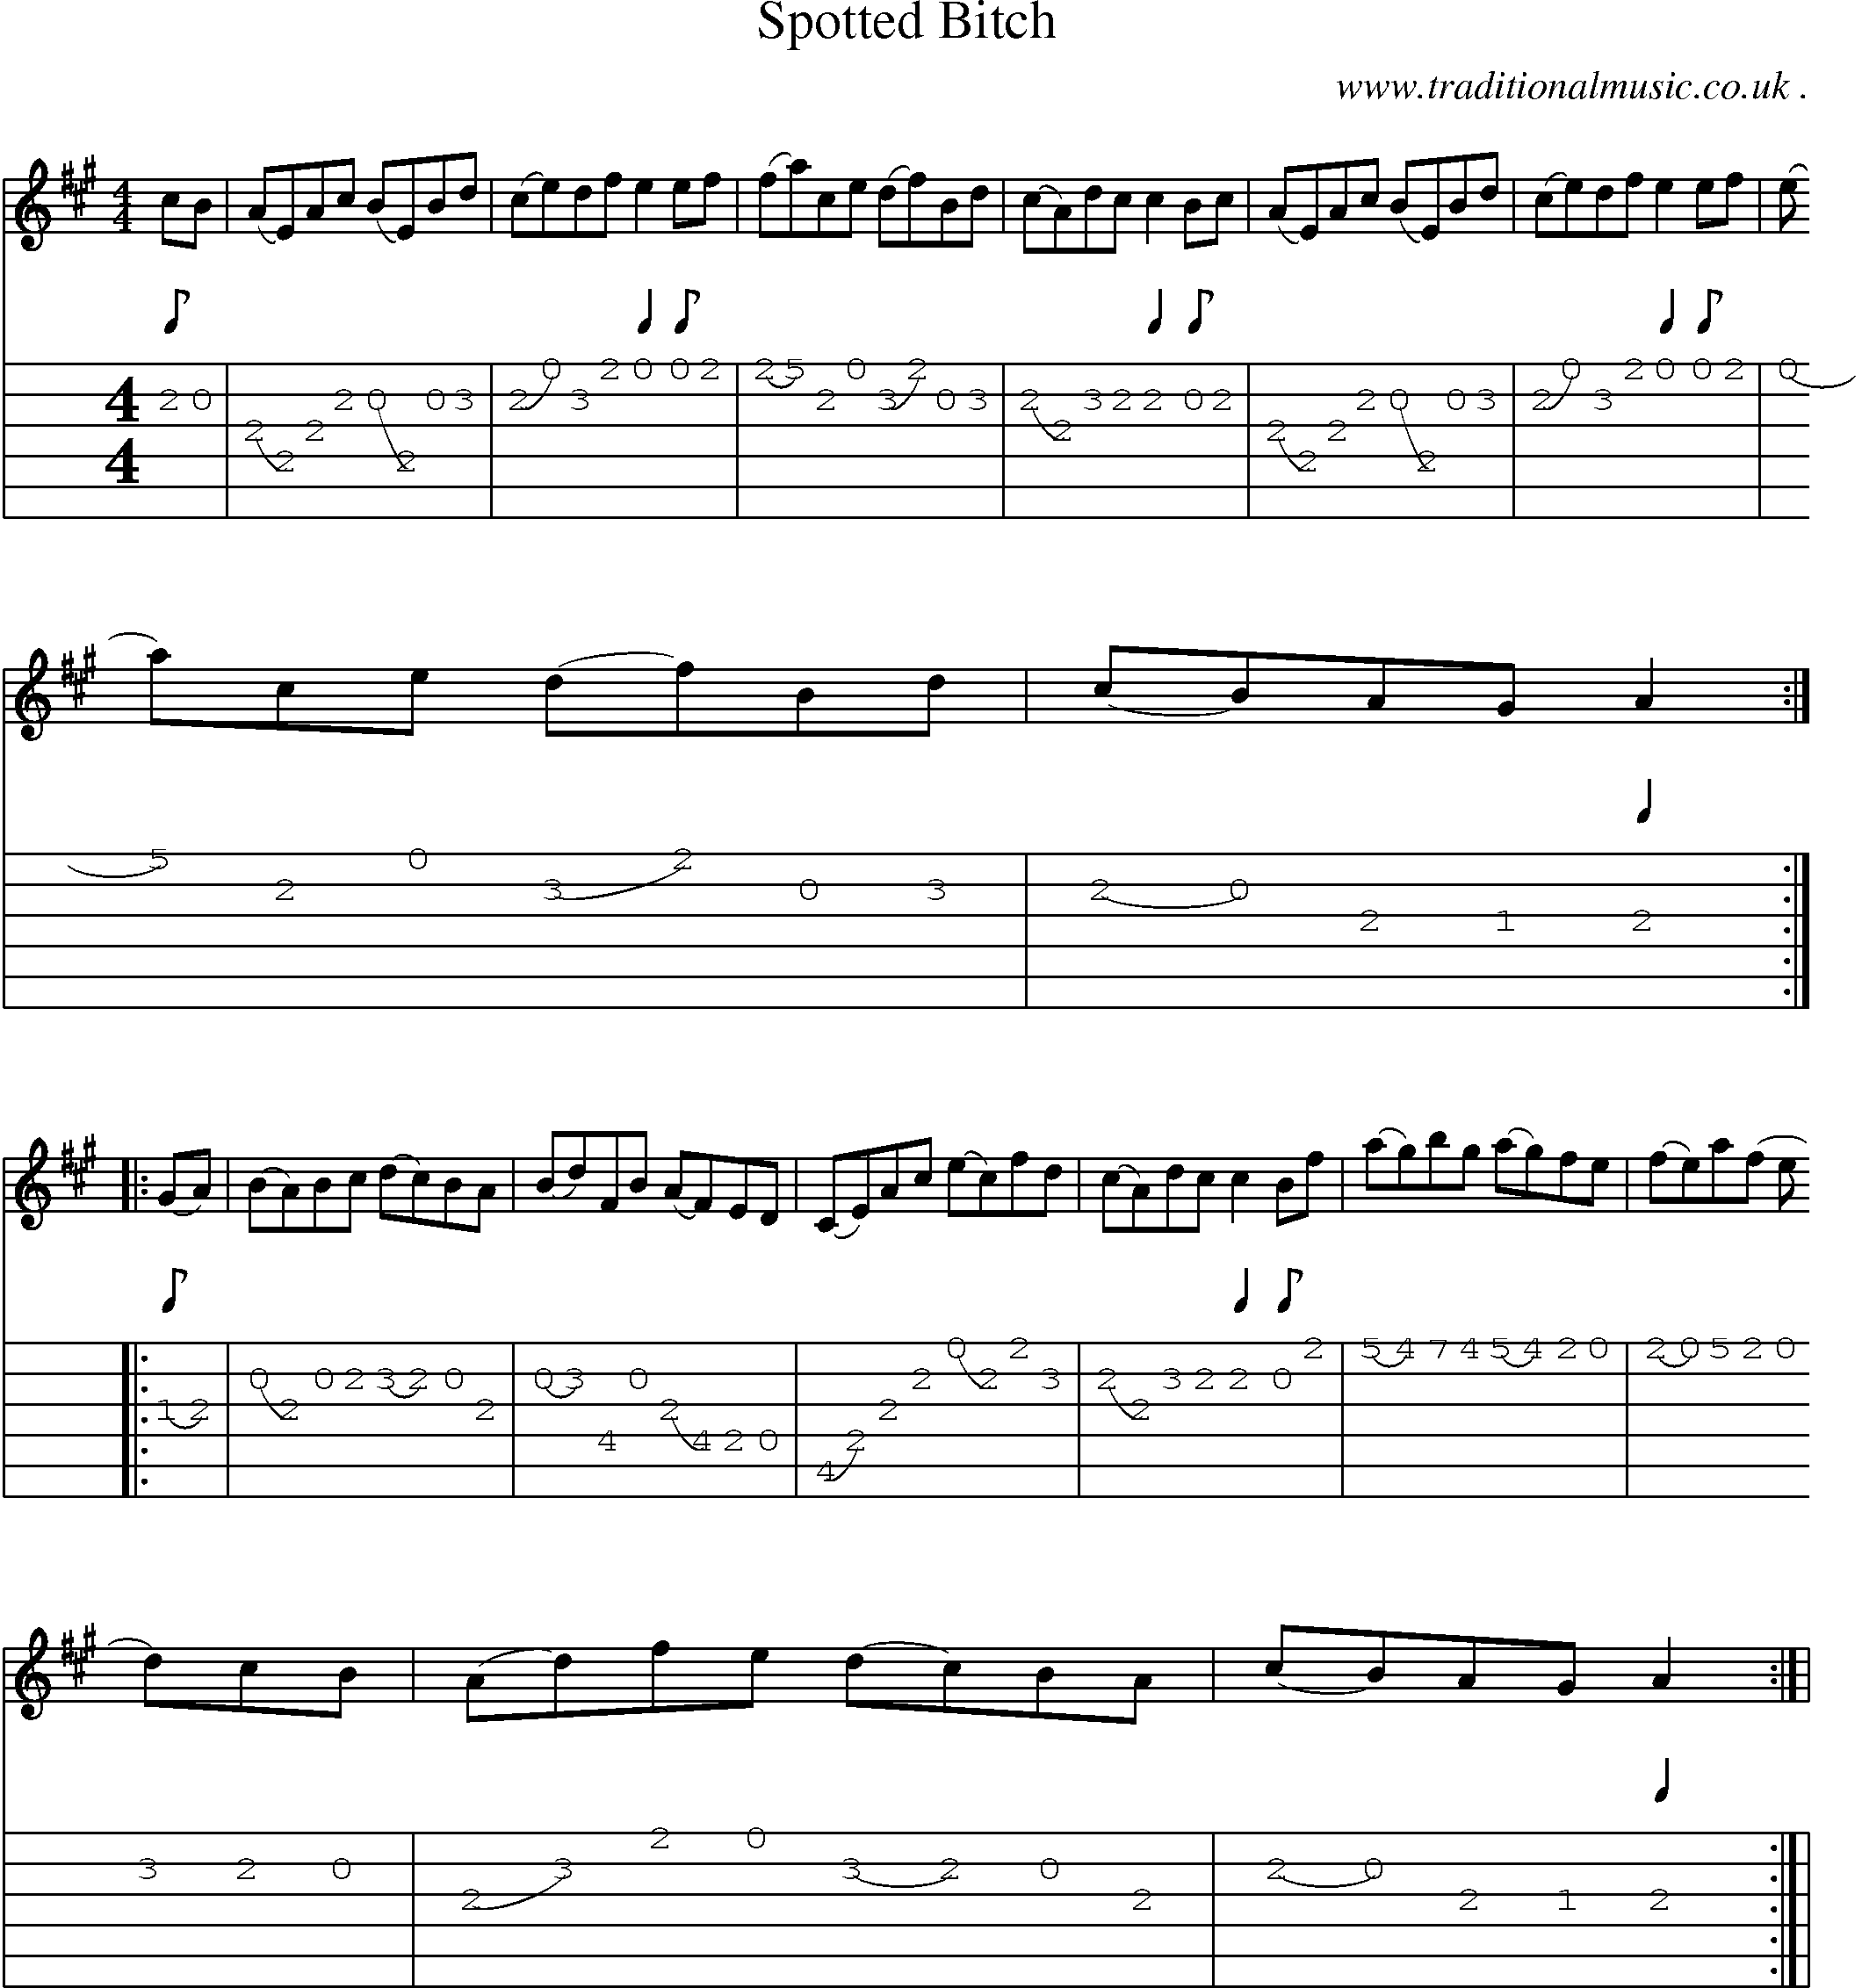 Sheet-Music and Guitar Tabs for Spotted Bitch